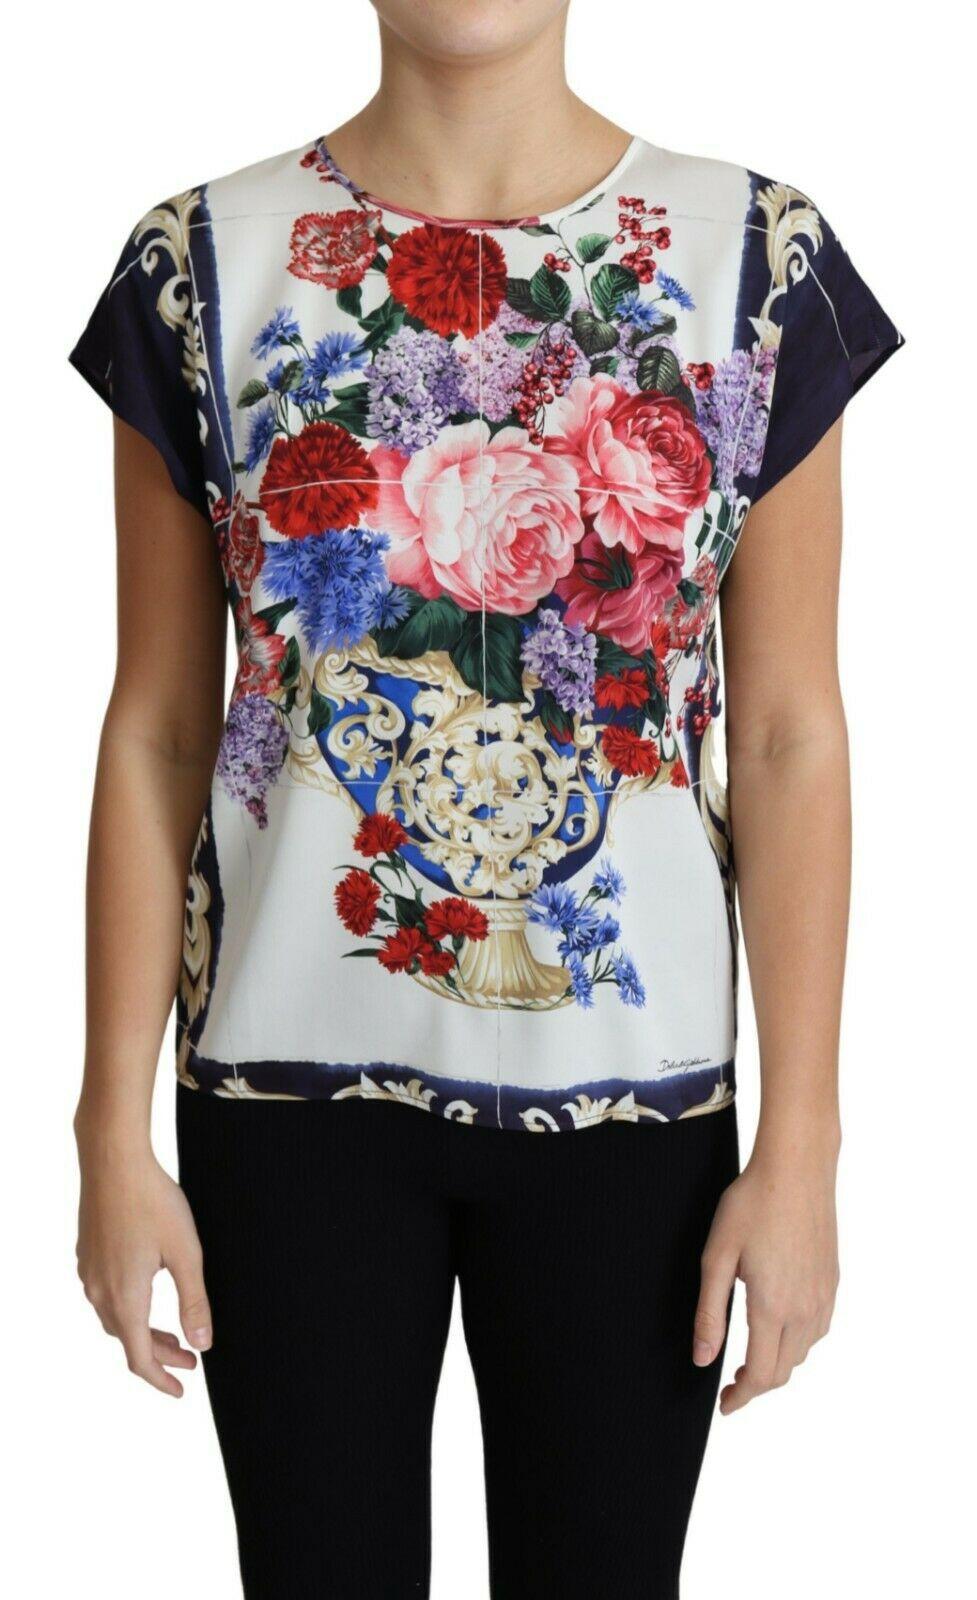 Gorgeous brand new with tags, 100% Authentic Dolce & Gabbana Tops. This delicately crafted piece is cut with cap sleeves and a round neckline with flower vase print emblazoned all over.



Model: Round neck Blouse

Material: 92% Silk 8%